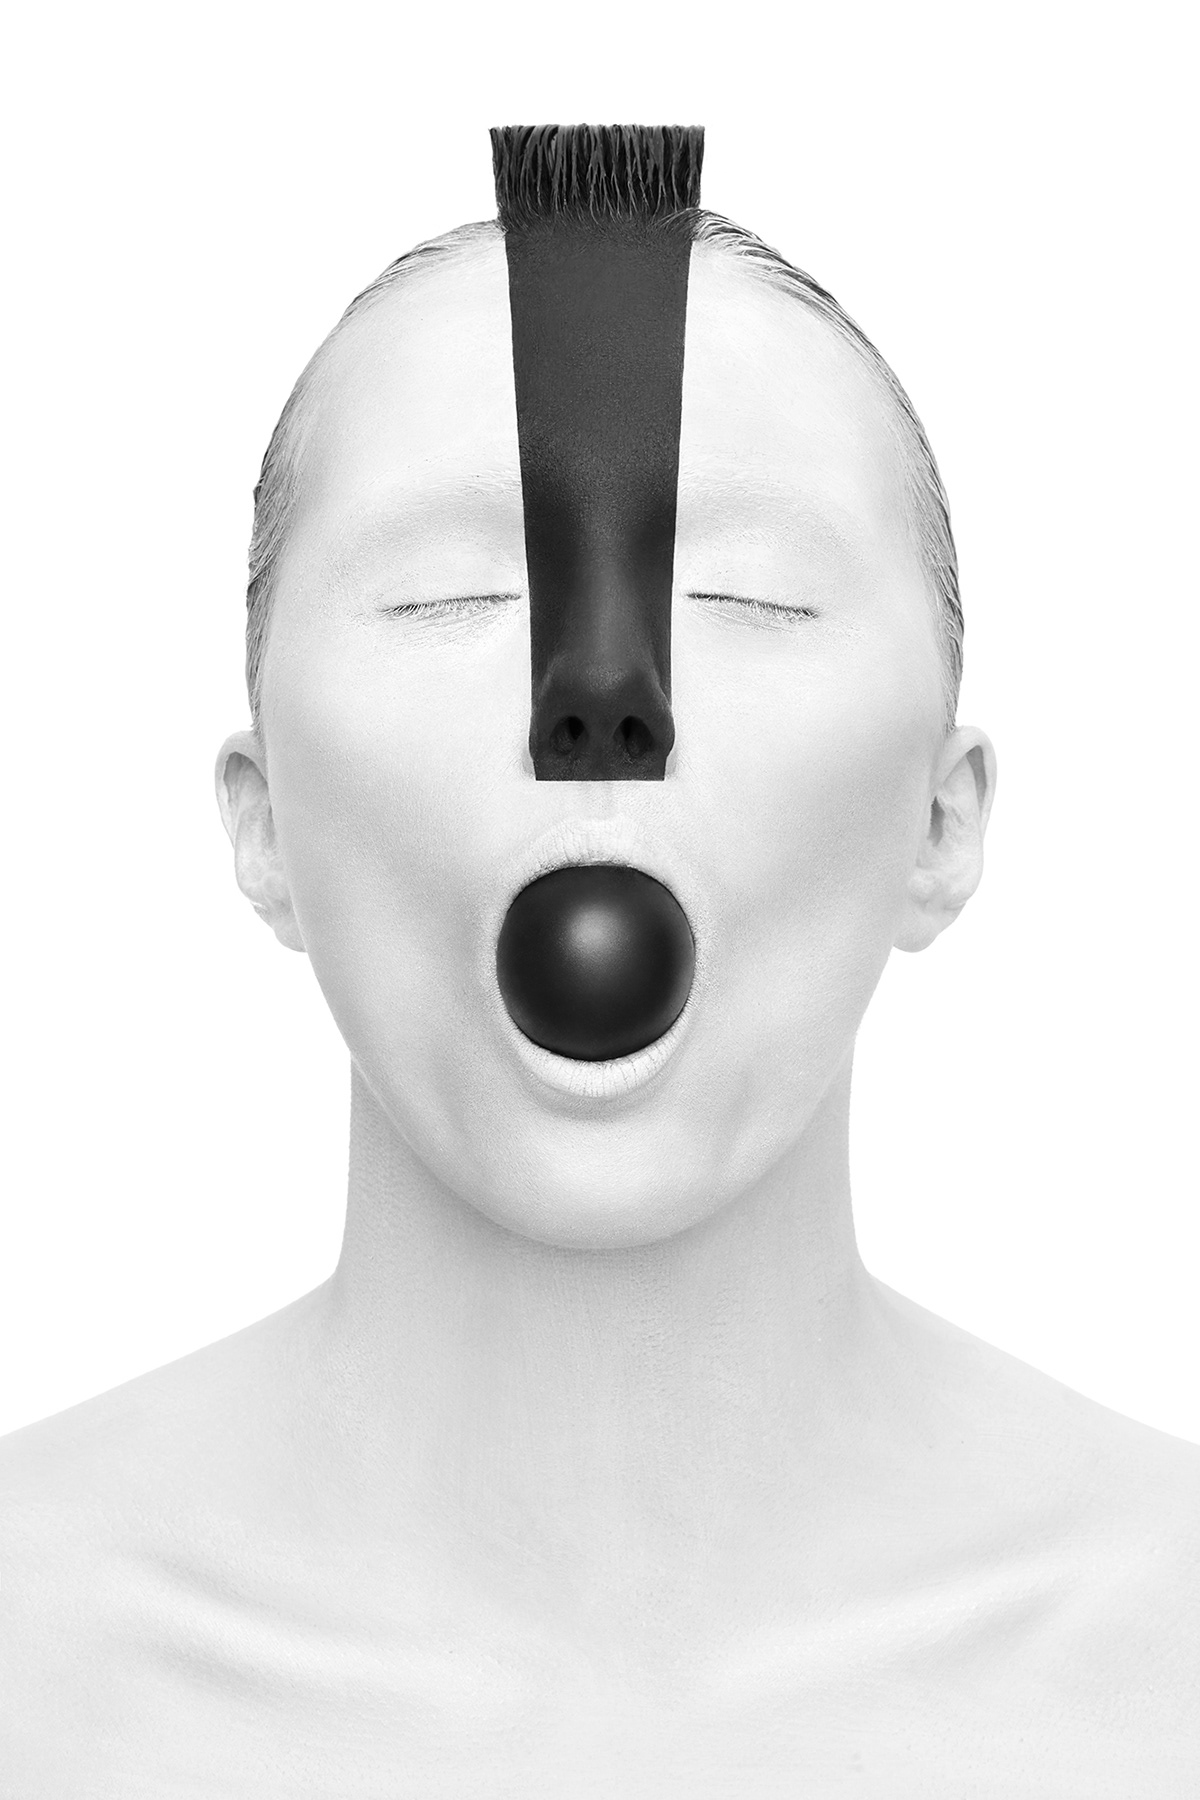 art make-up conceptual black and white graphic illusion Face painting art direction 